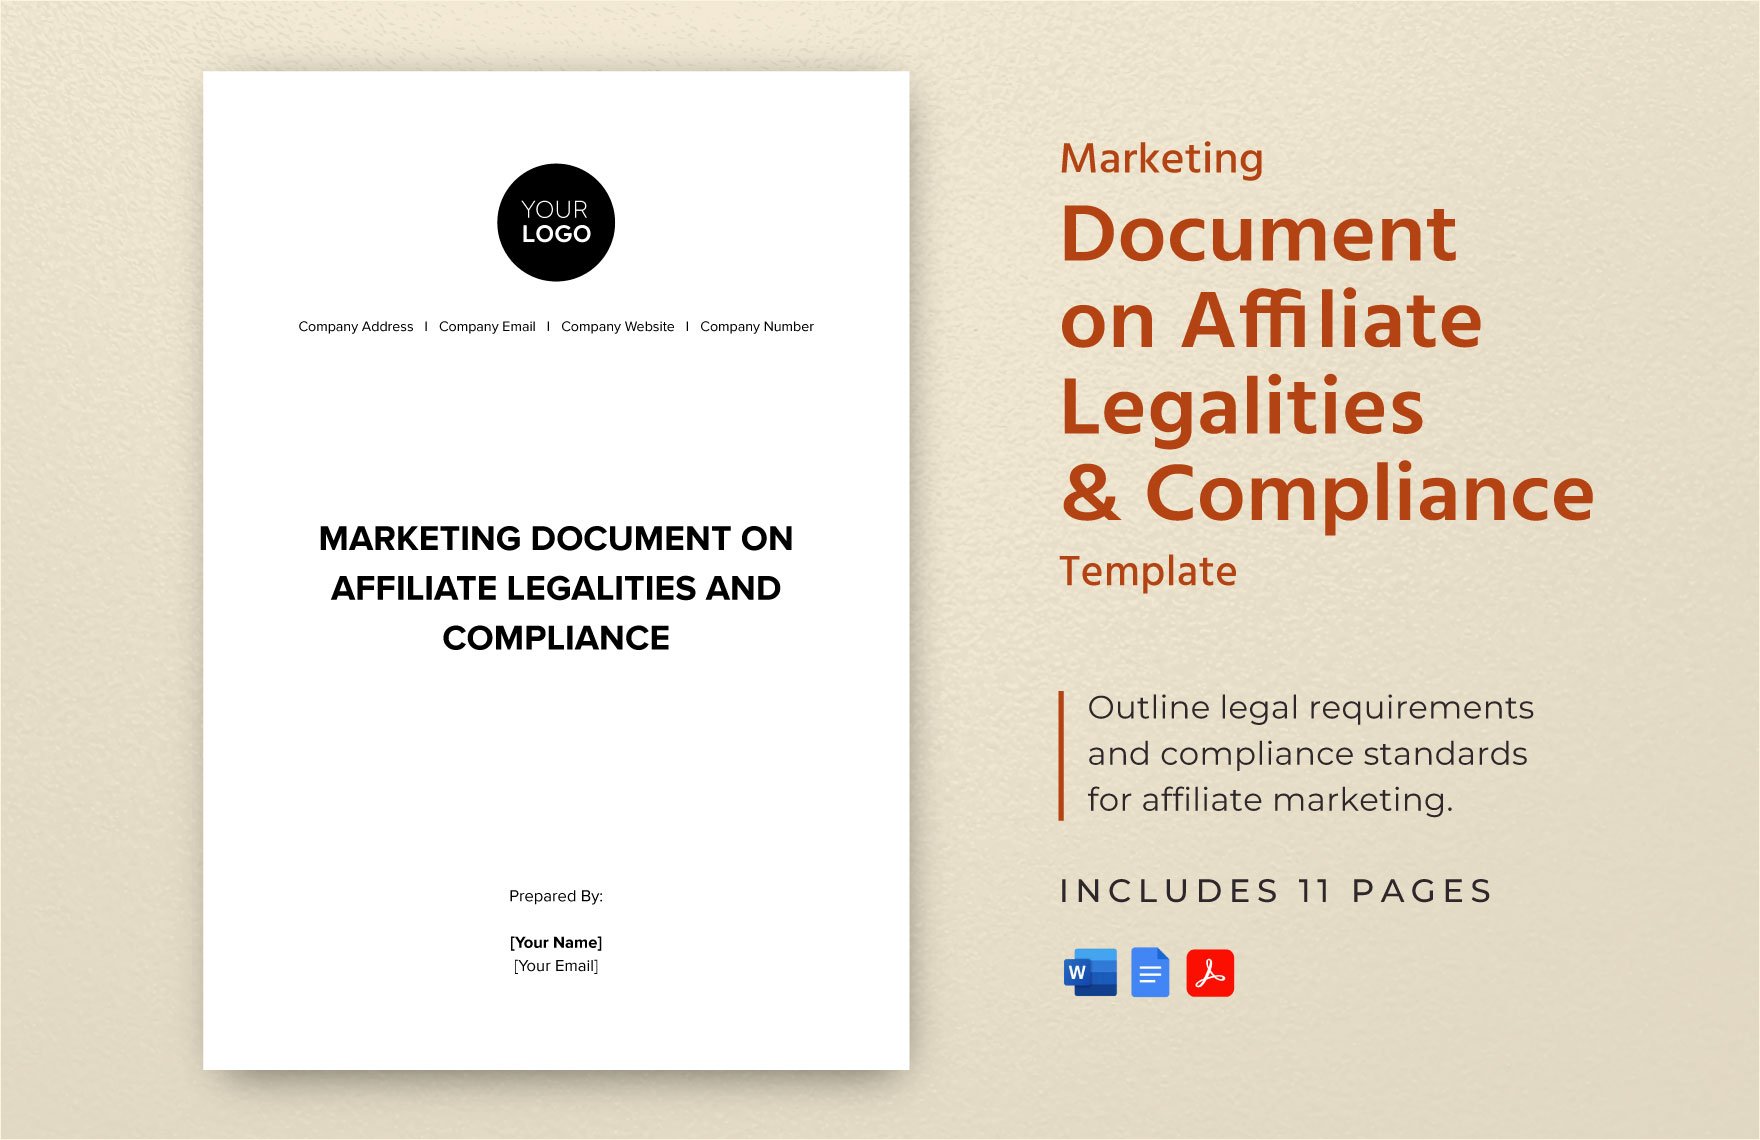 Marketing Document on Affiliate Legalities & Compliance Template in Word, Google Docs, PDF